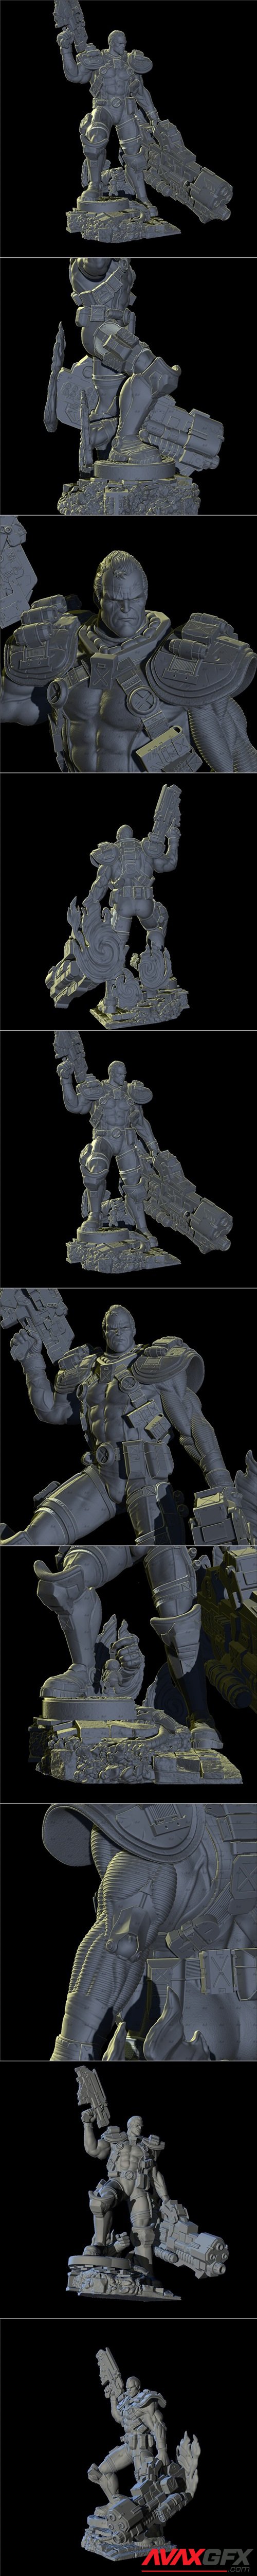 Cable – 3D Printable STL